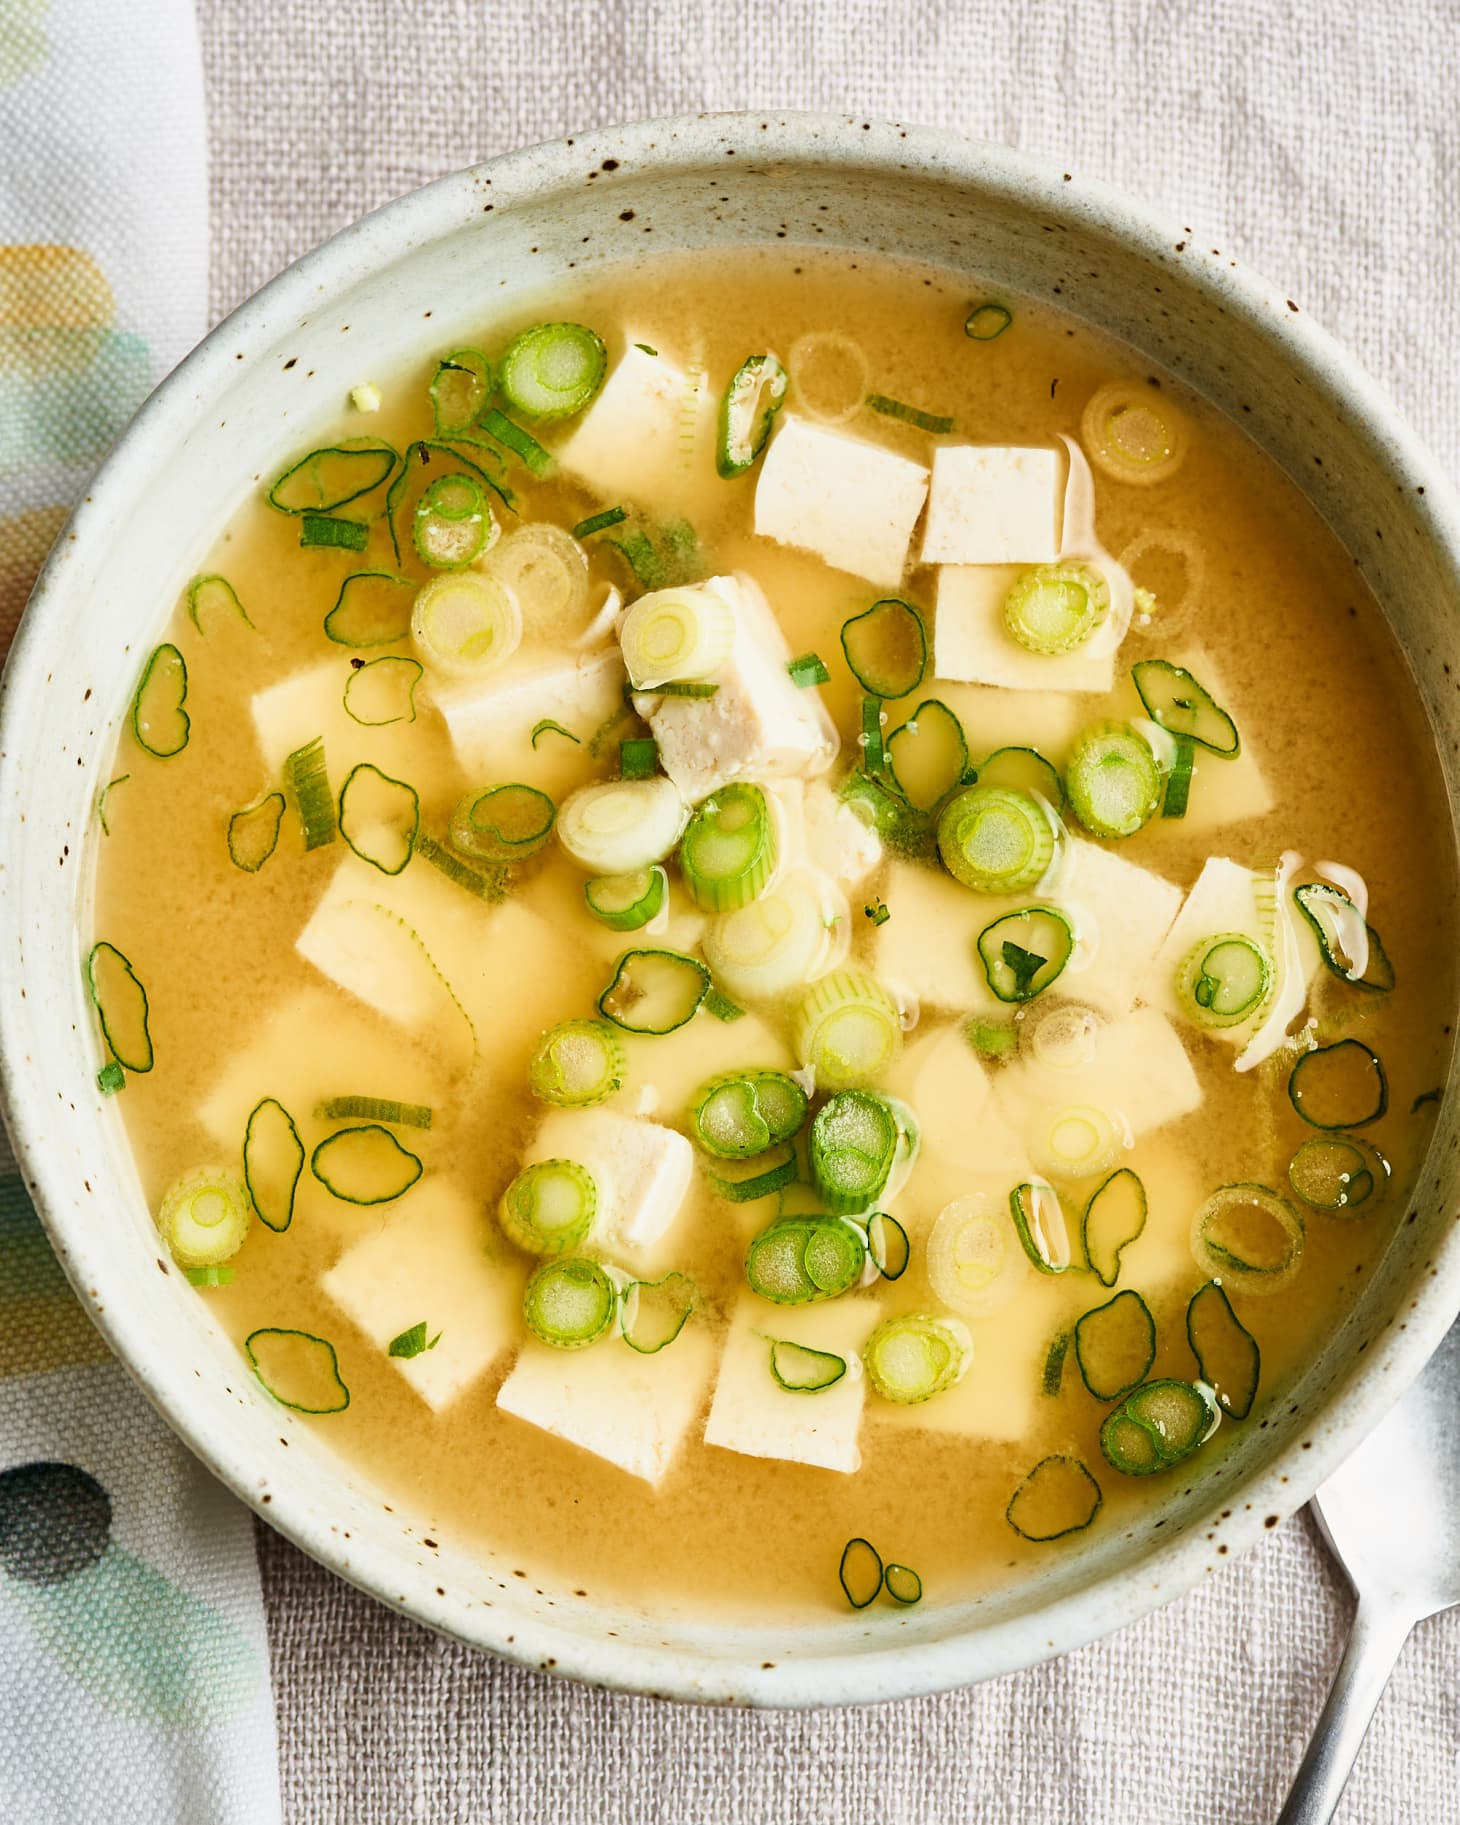 How To Make Easy & Delicious Miso Soup at Home | Kitchn